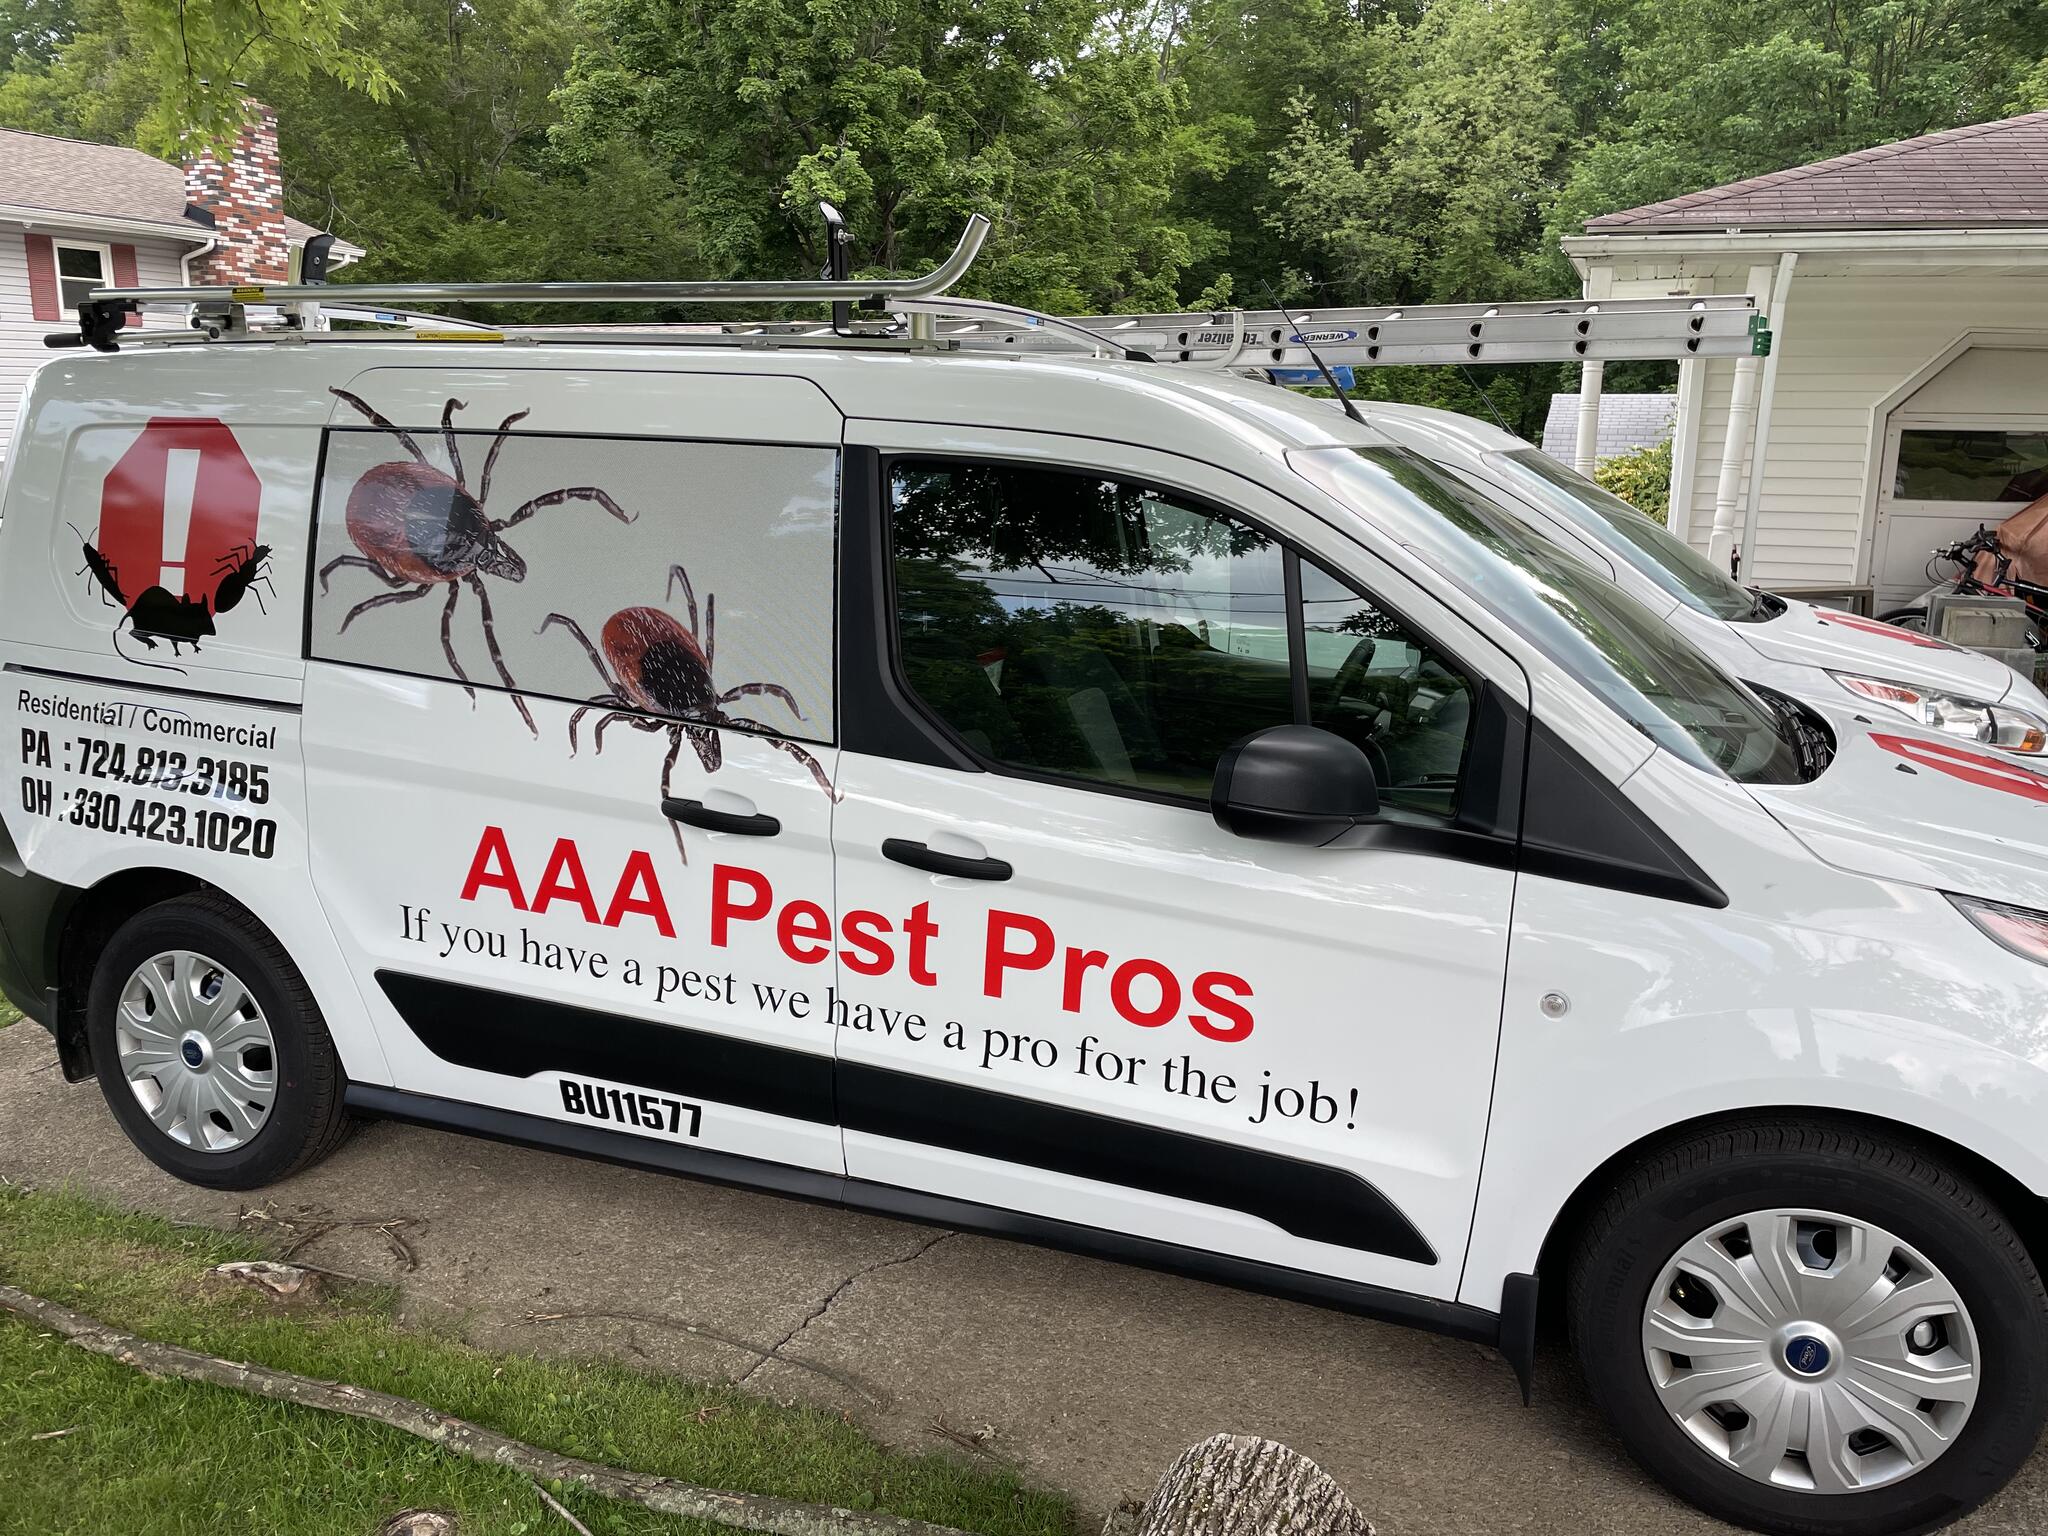 AAA Pest Pros 3744 New Castle Rd, West Middlesex Pennsylvania 16159